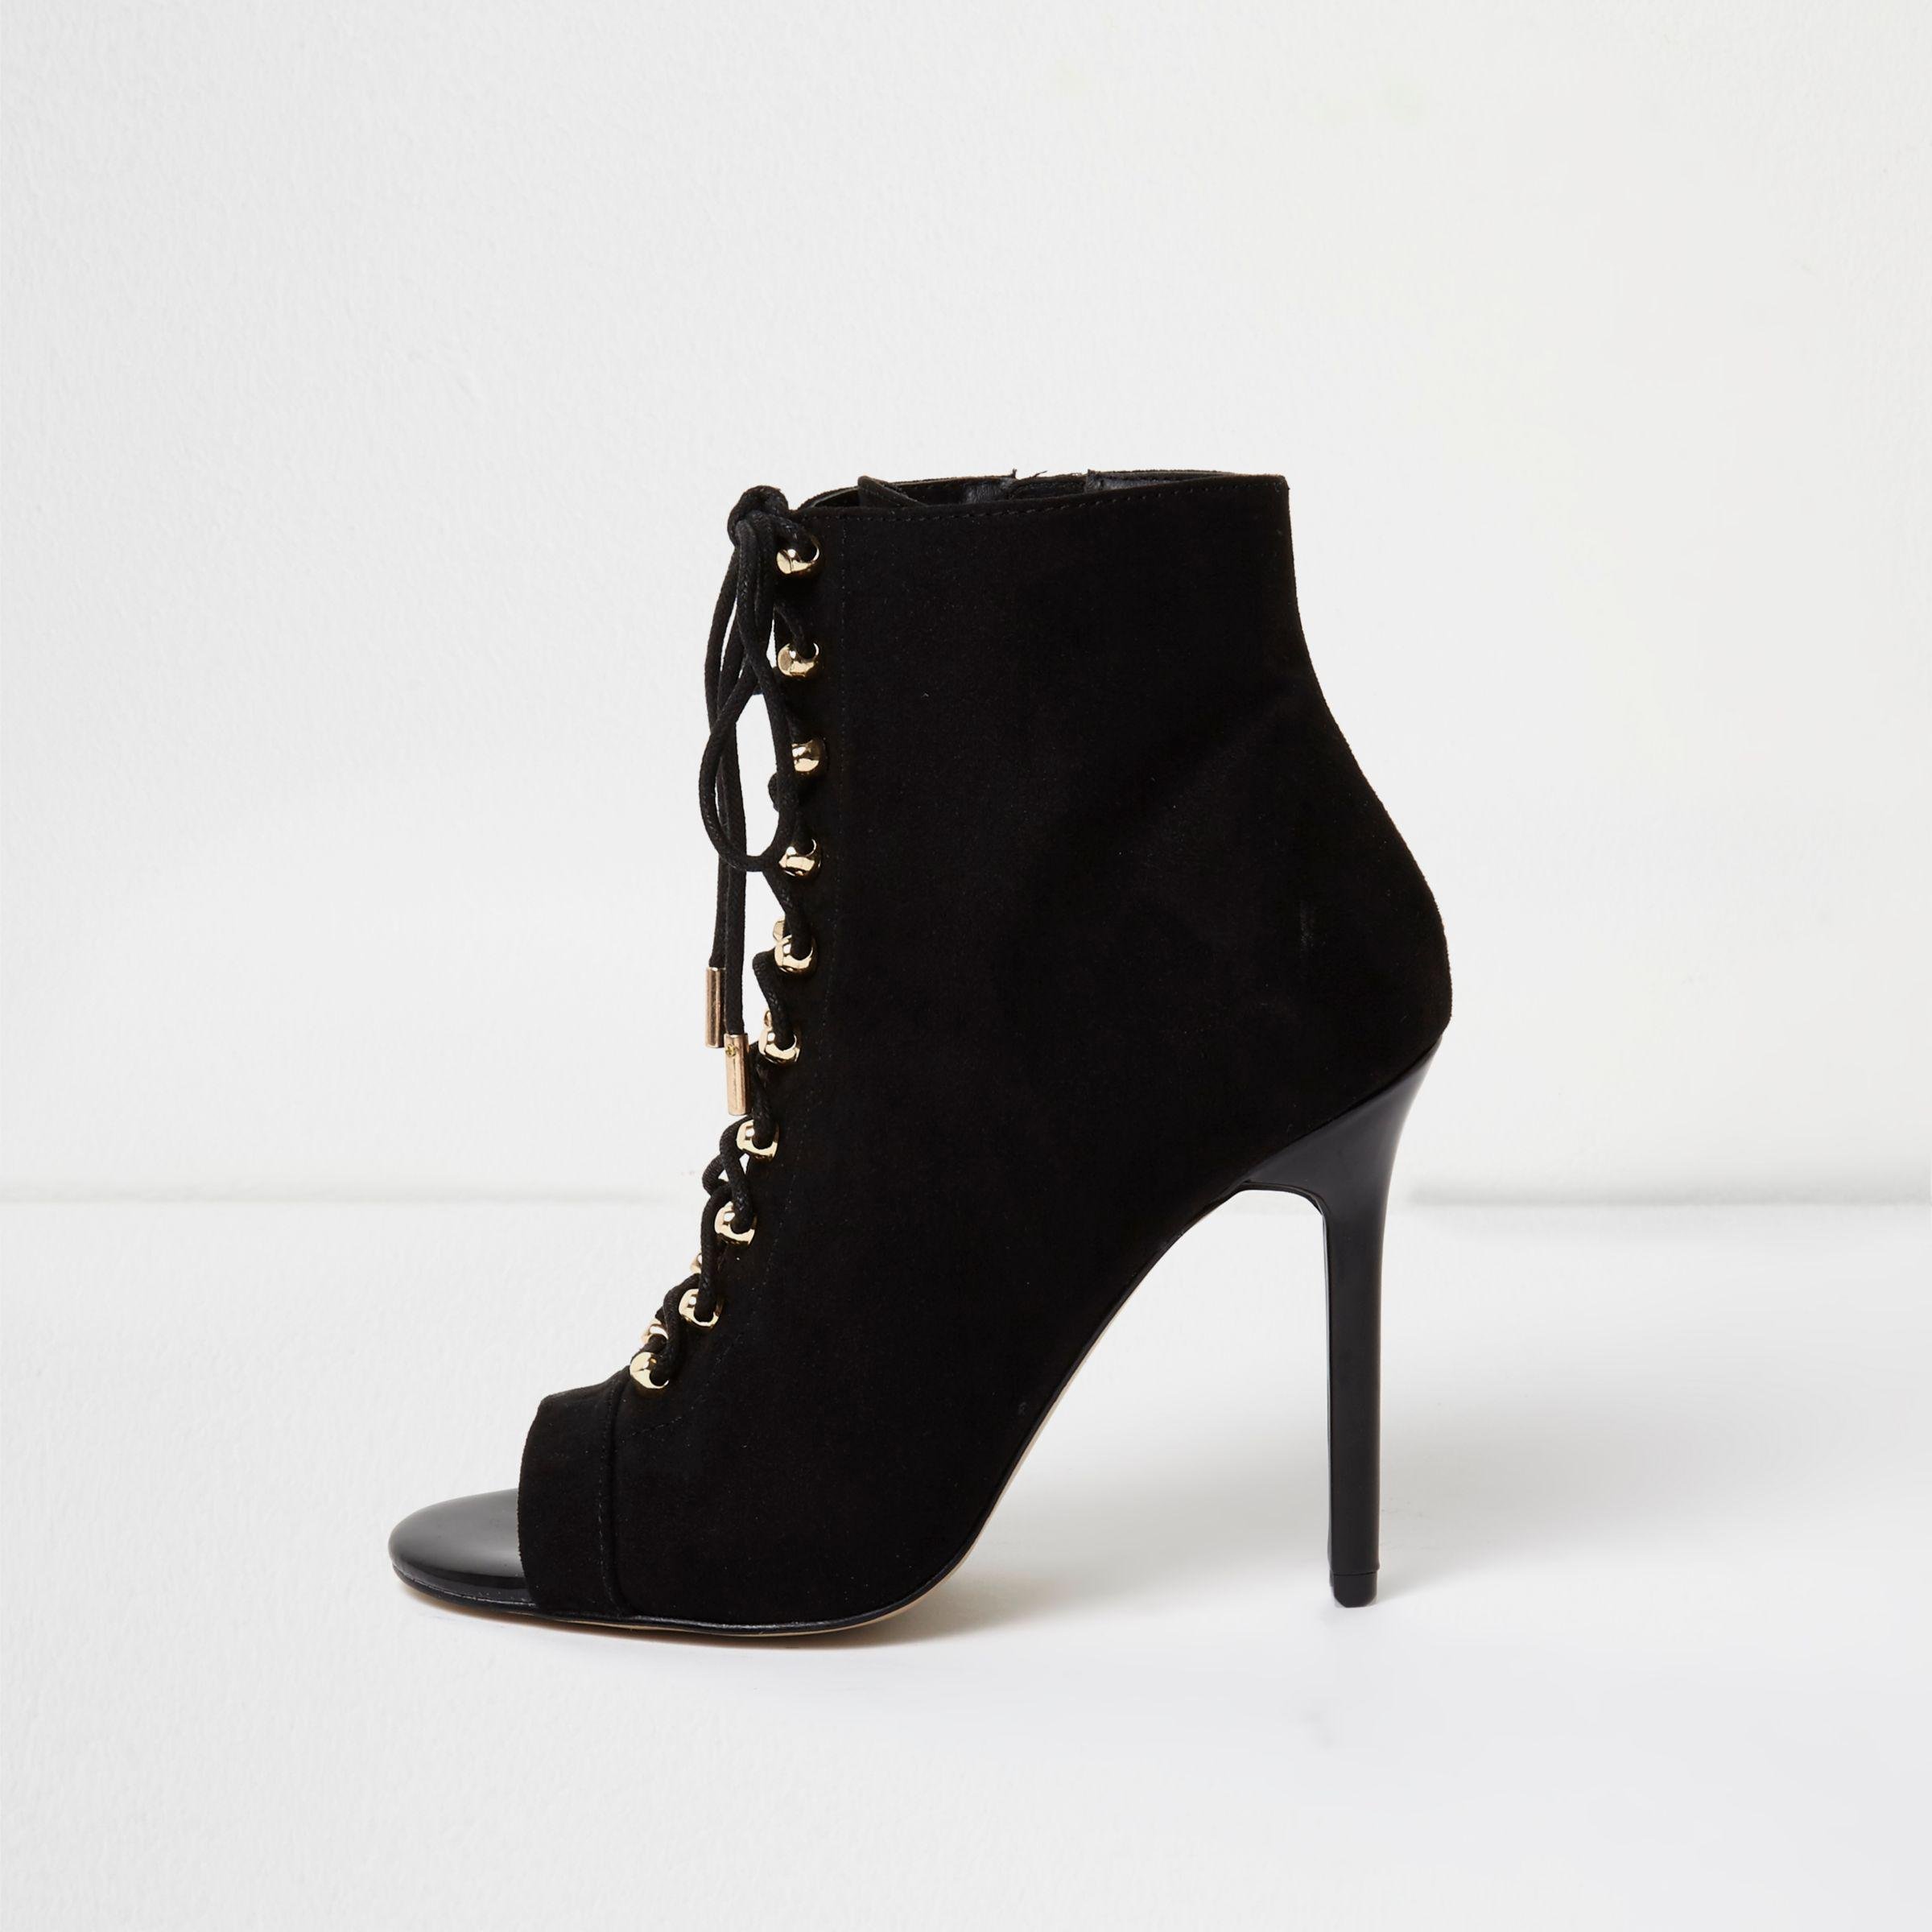 River Island Black Open Toe Lace-up Heeled Boots - Lyst